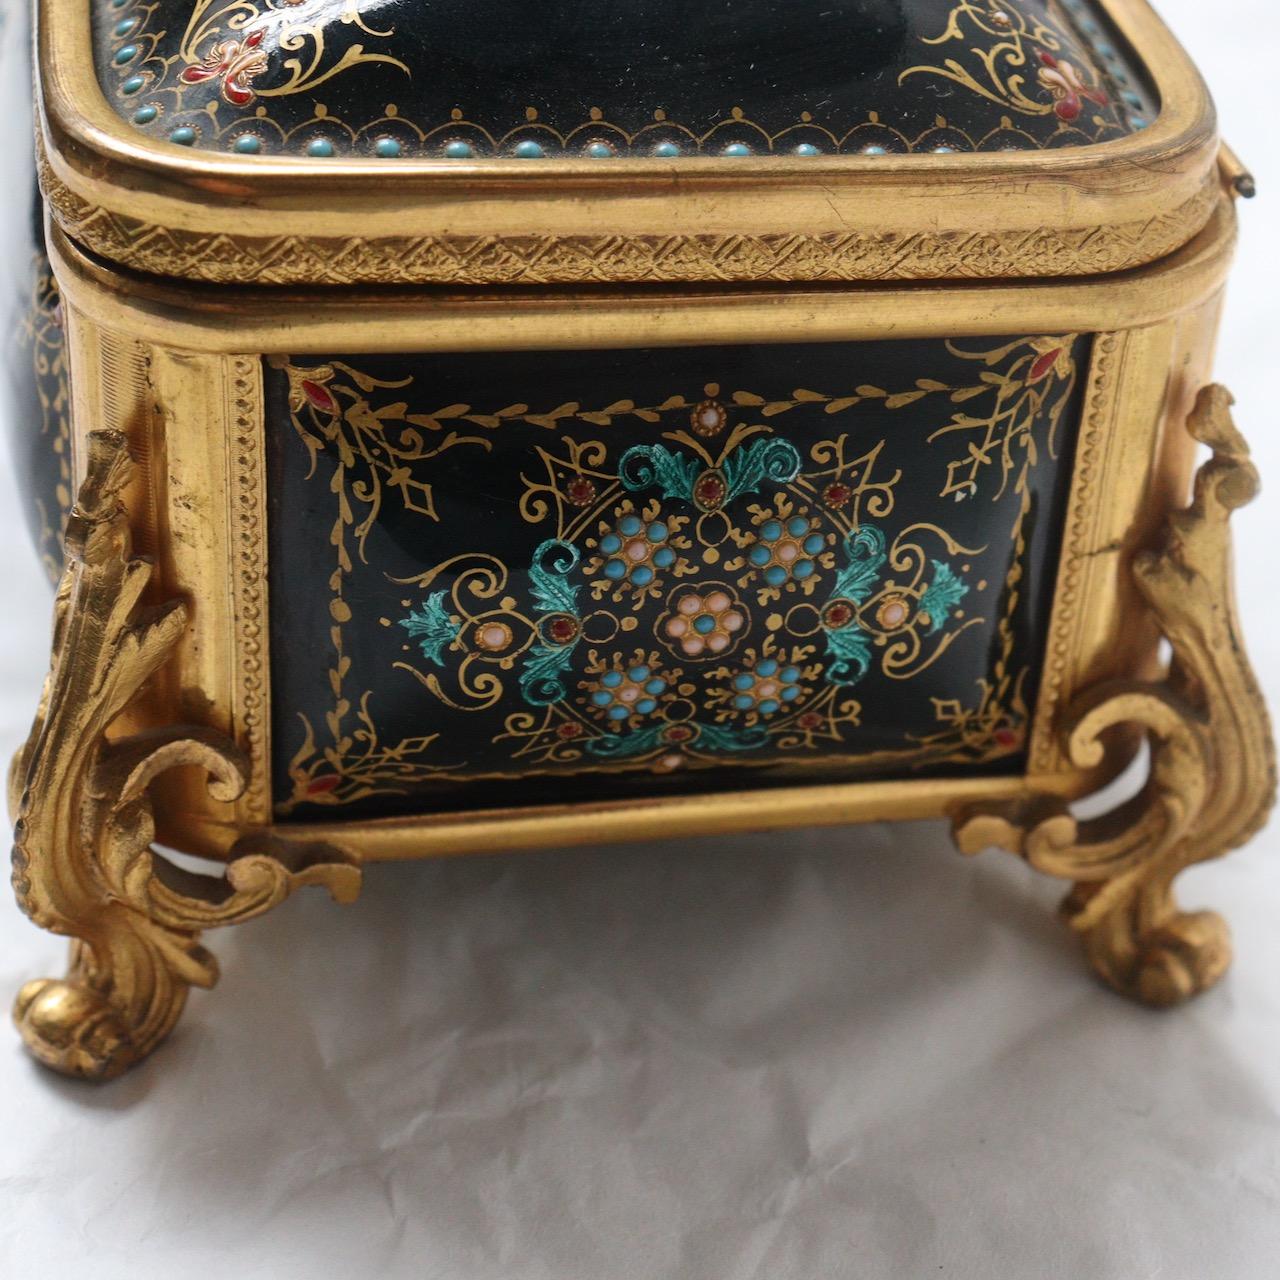 Late 19th Century 19th Century French Enamel and Ormolu-Mounted Jewelry Casket